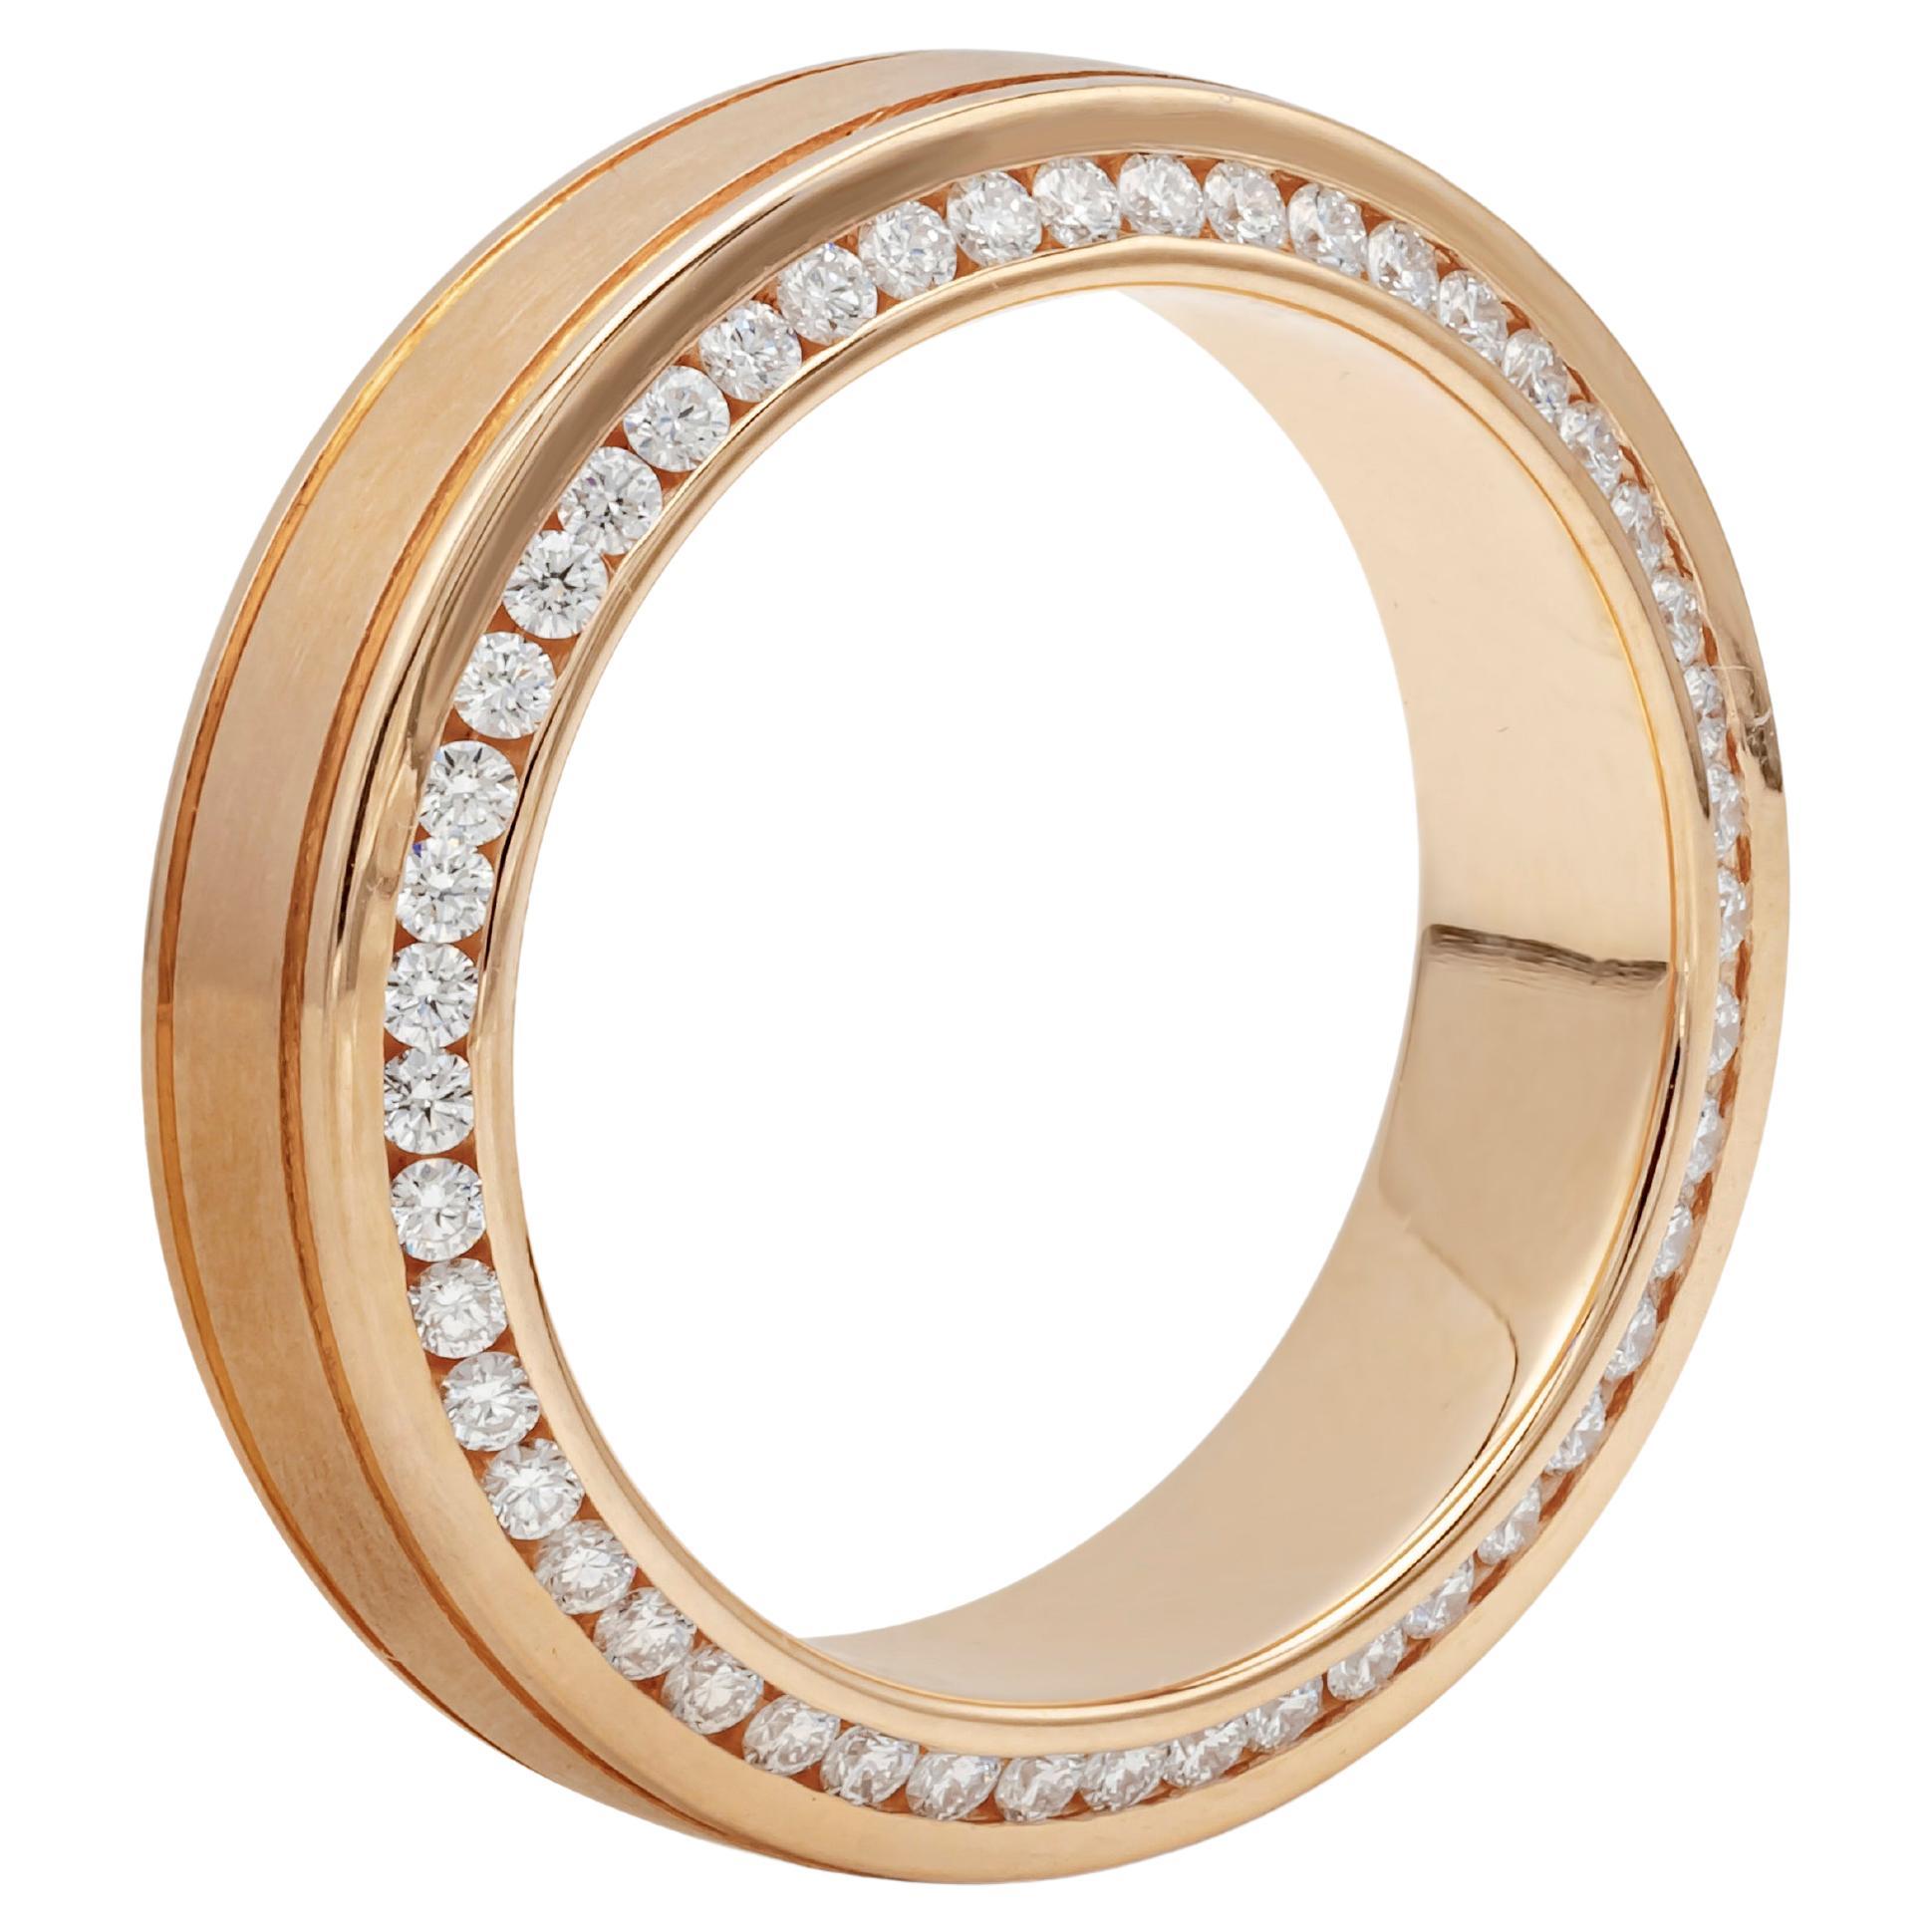 1.21 Carats Total Round Brilliant Diamond Men's Wedding Band in 18K Rose Gold